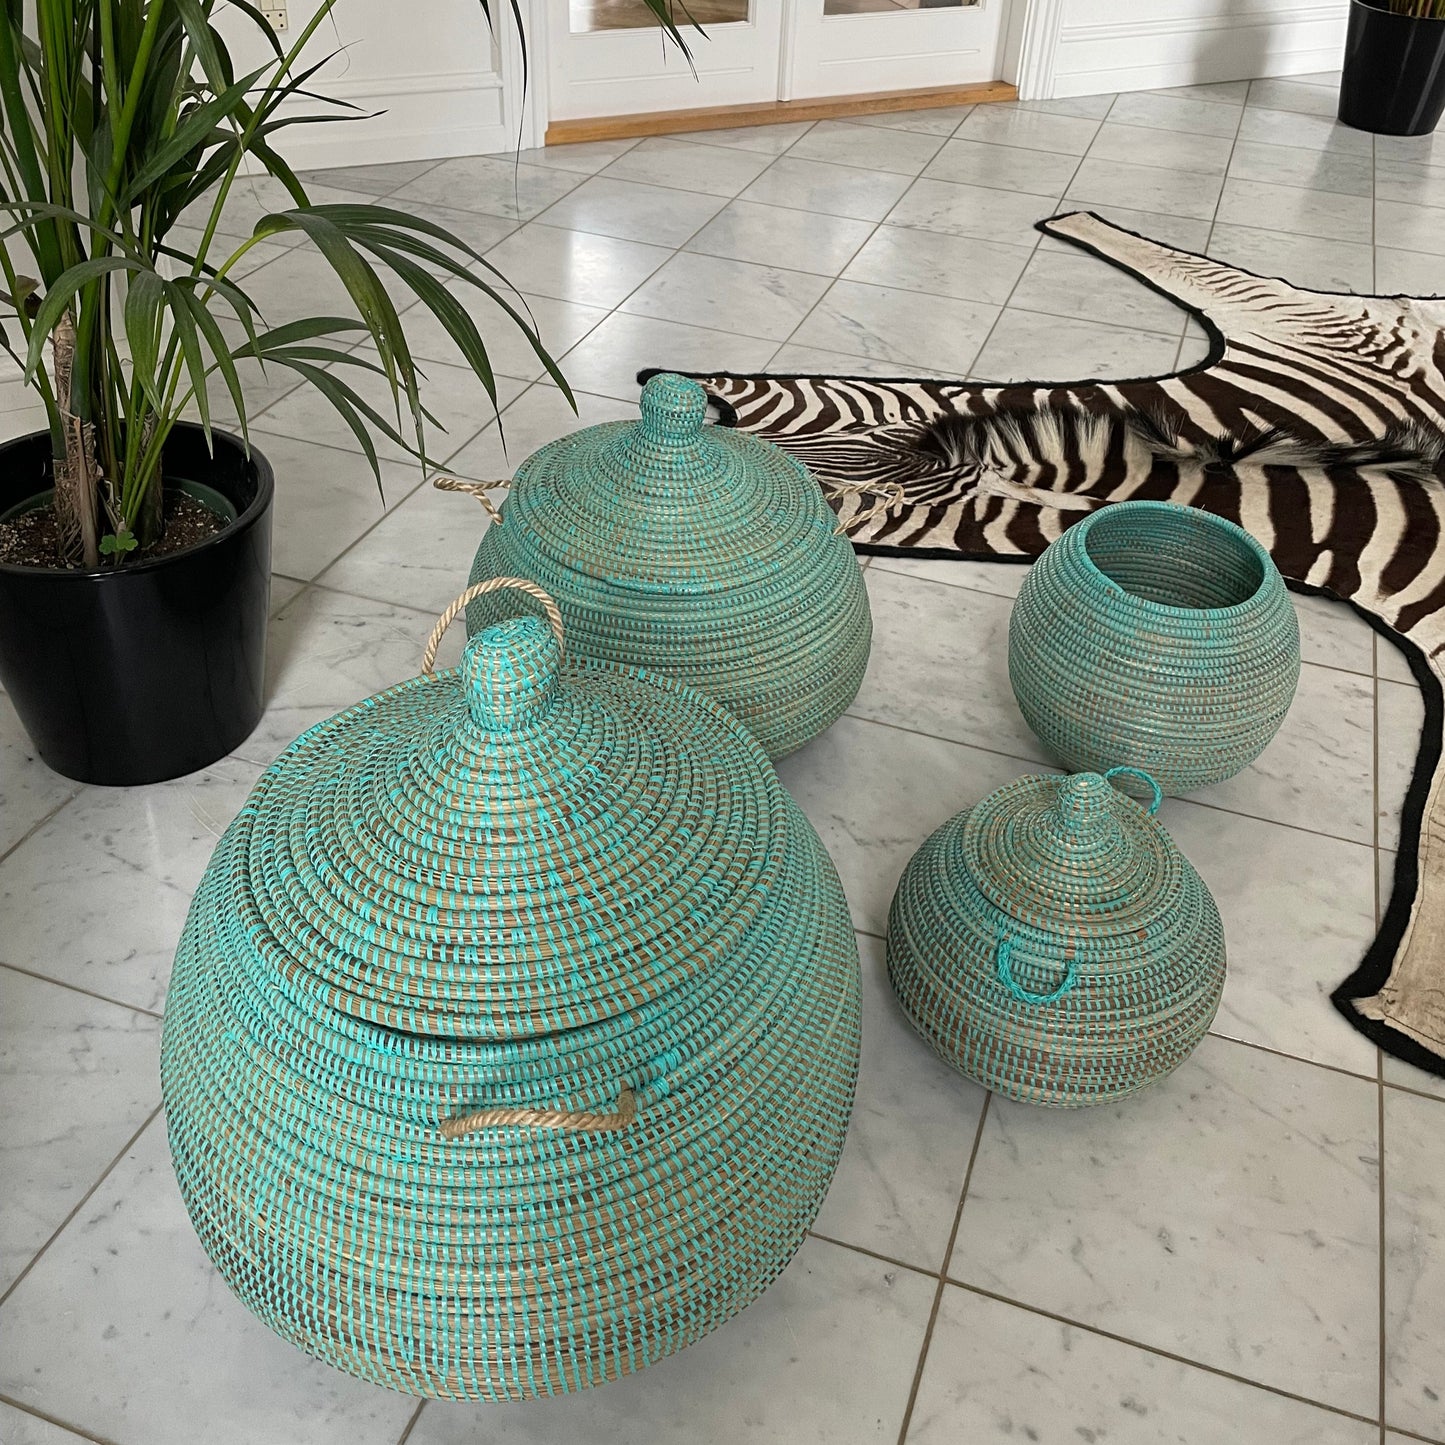 Ball baskets (Ndaa). Handwoven basket with lid in elephant grass with recycled plastic thread. Turquoise. Fair Trade from Senegal